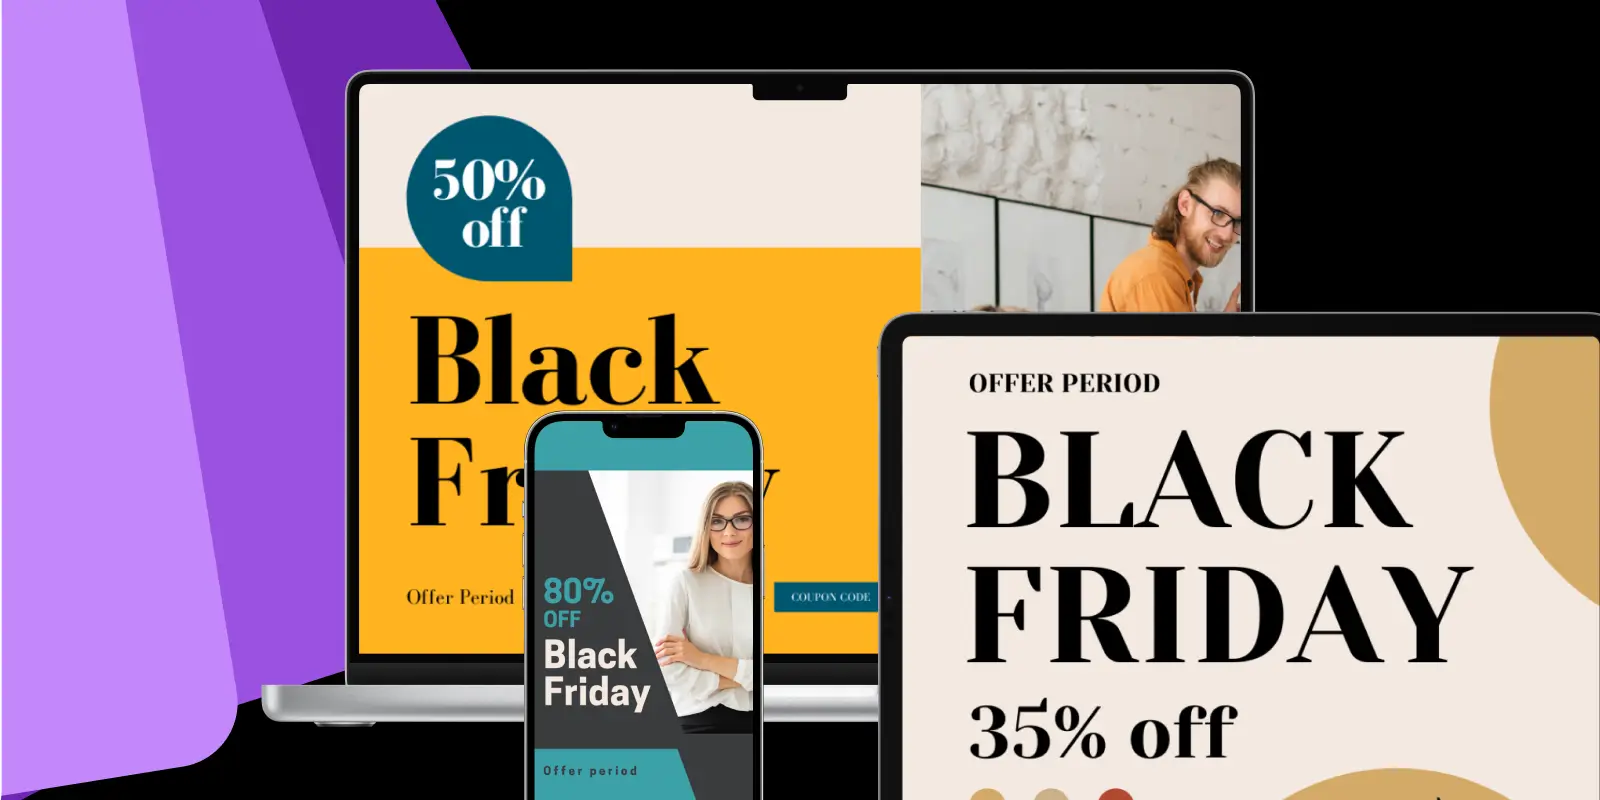 Black Friday Landing Page Examples and top performing landing pages.